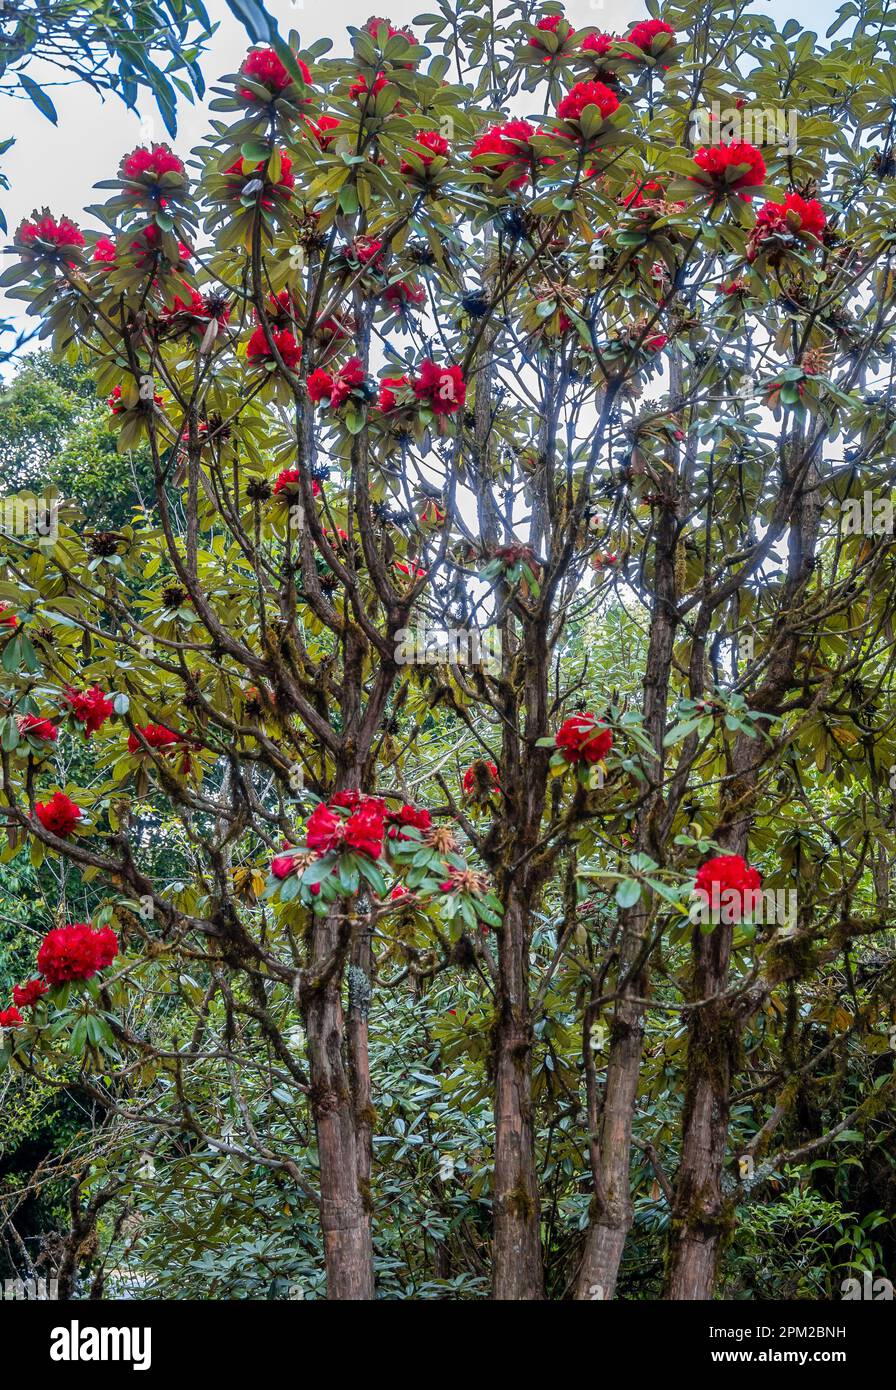 Bright red flowers of Tree Rhododendron (Rhododendron arboreum). Doi Inthanon National Park, Chiang Mai, Thailand. Stock Photo